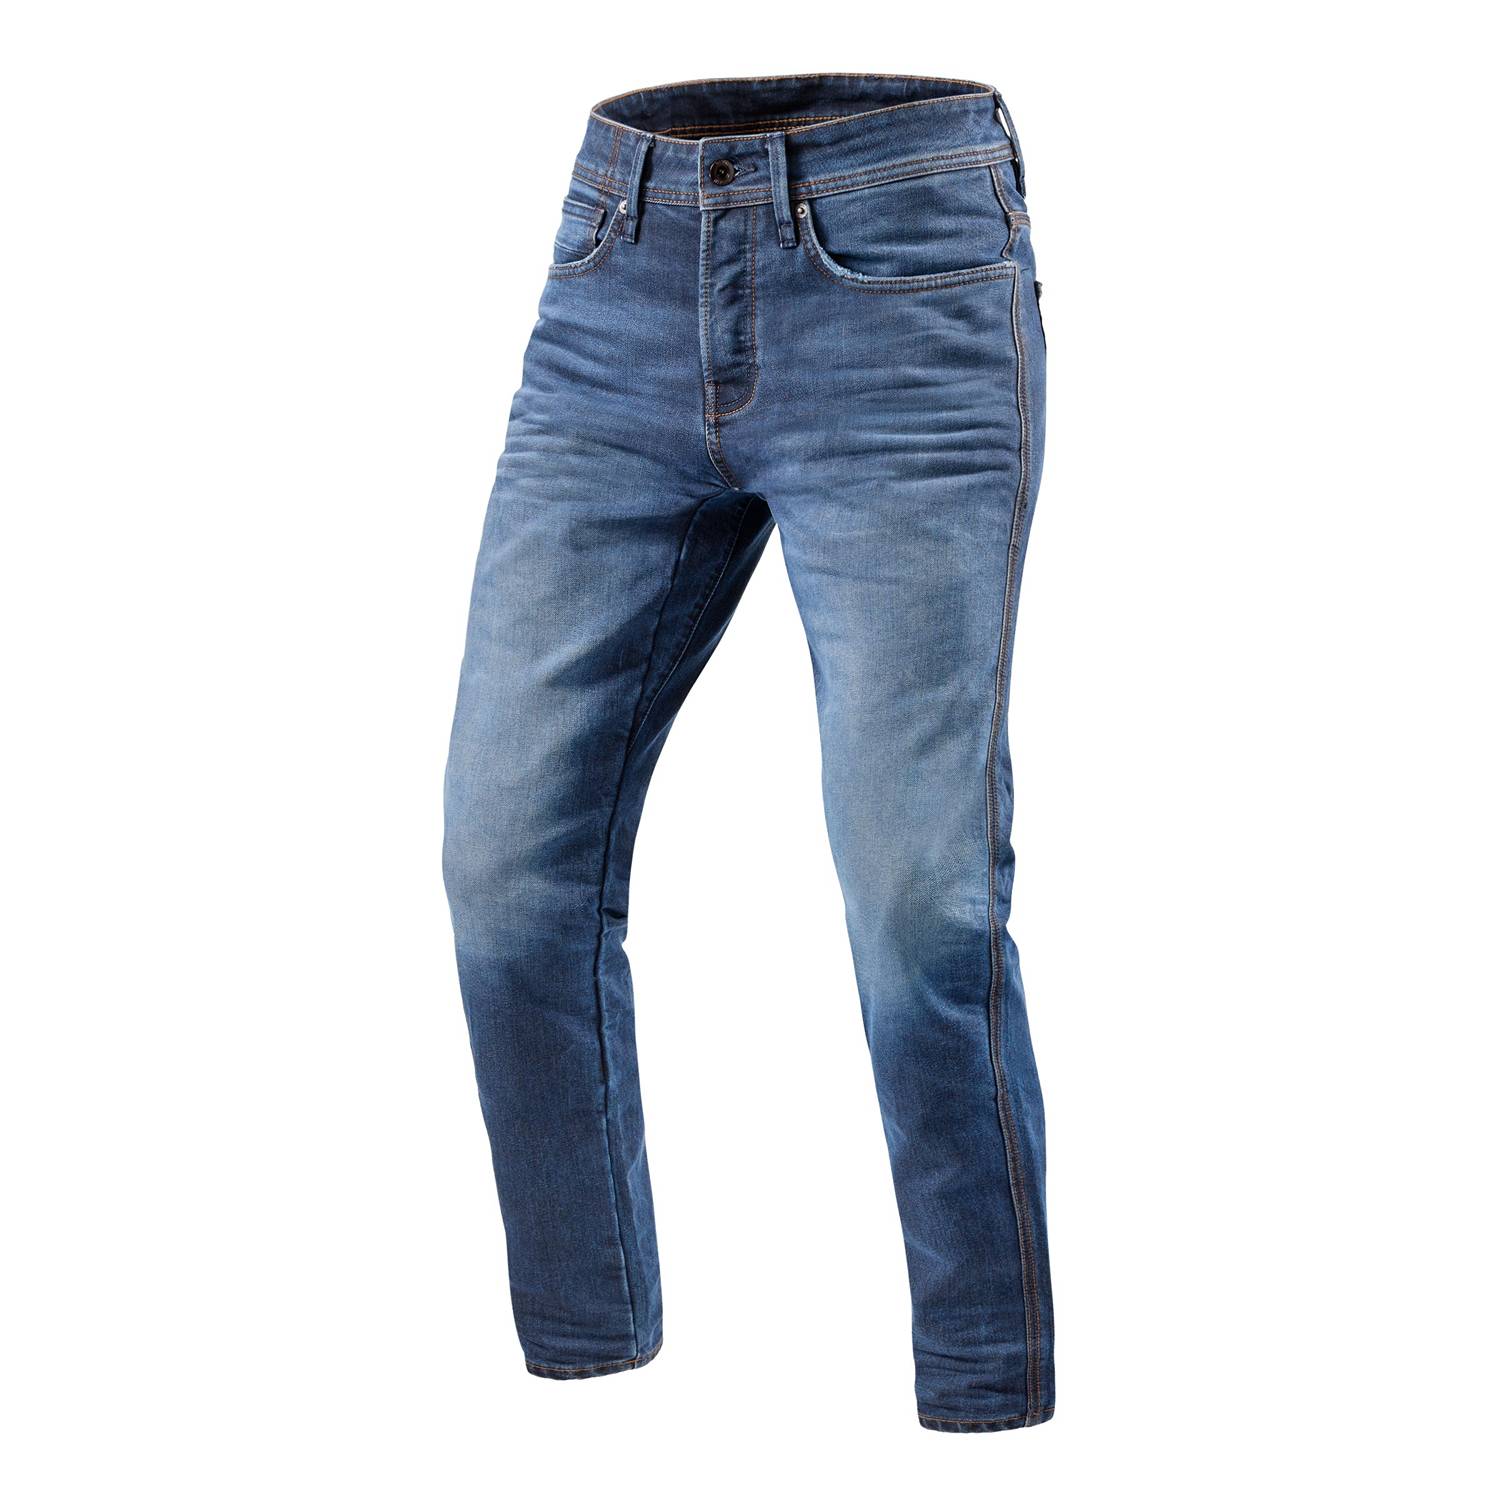 Image of REV'IT! Jeans Reed SF Mid Blue Used Motorcycle Jeans Size L36/W32 ID 8700001337359